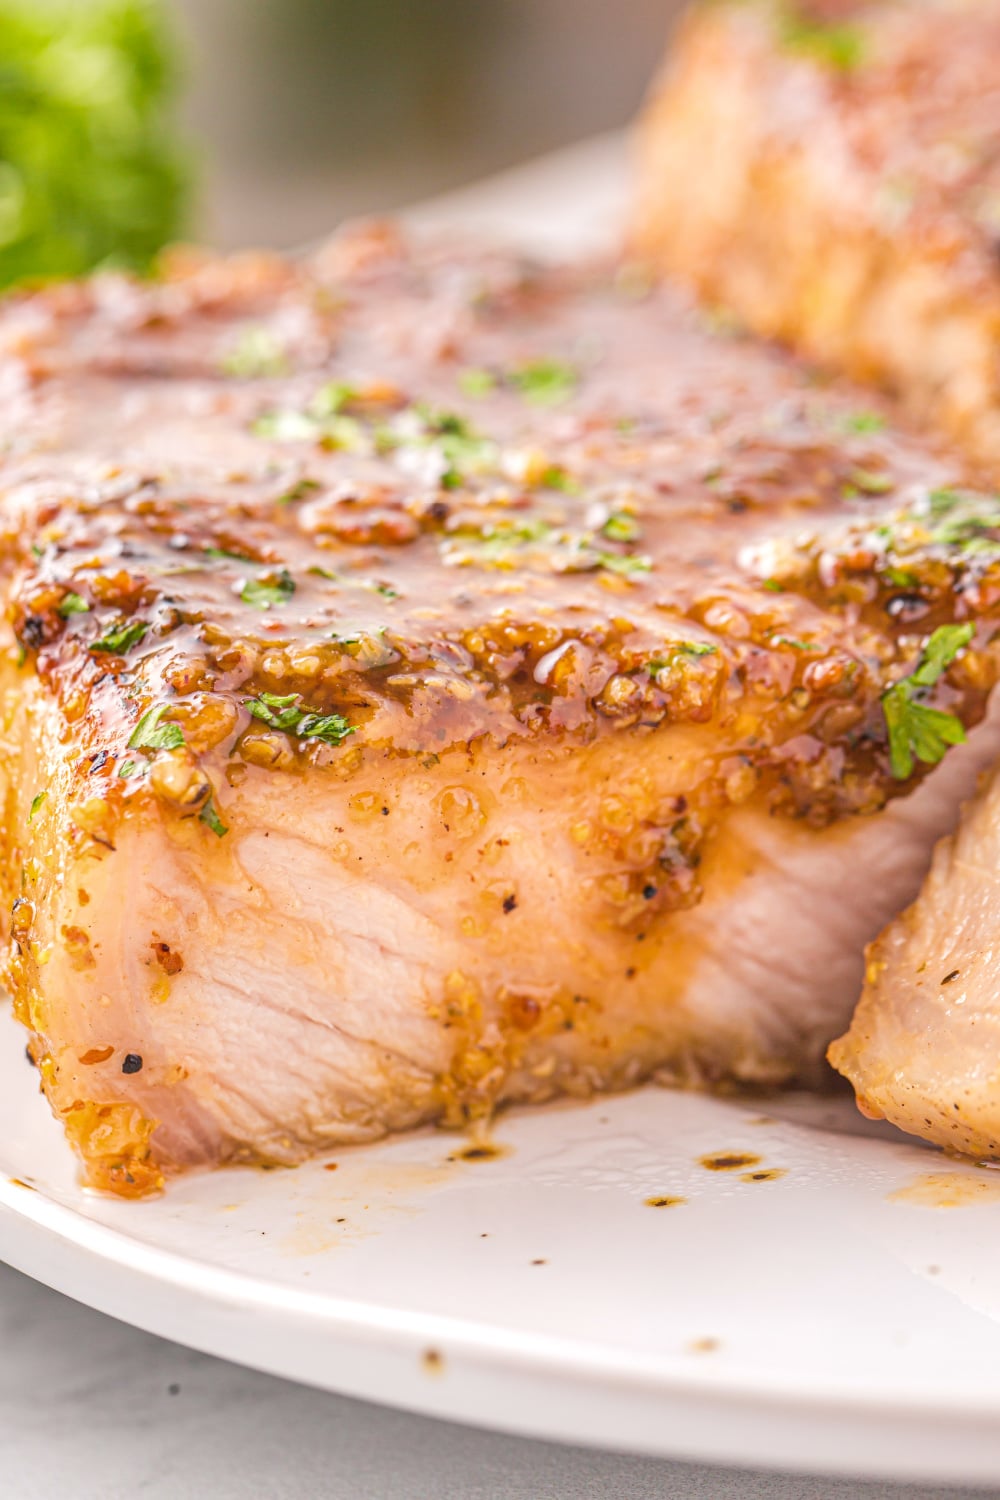 A pork chop topped with glaze sliced to reveal the tender inside of the chop.